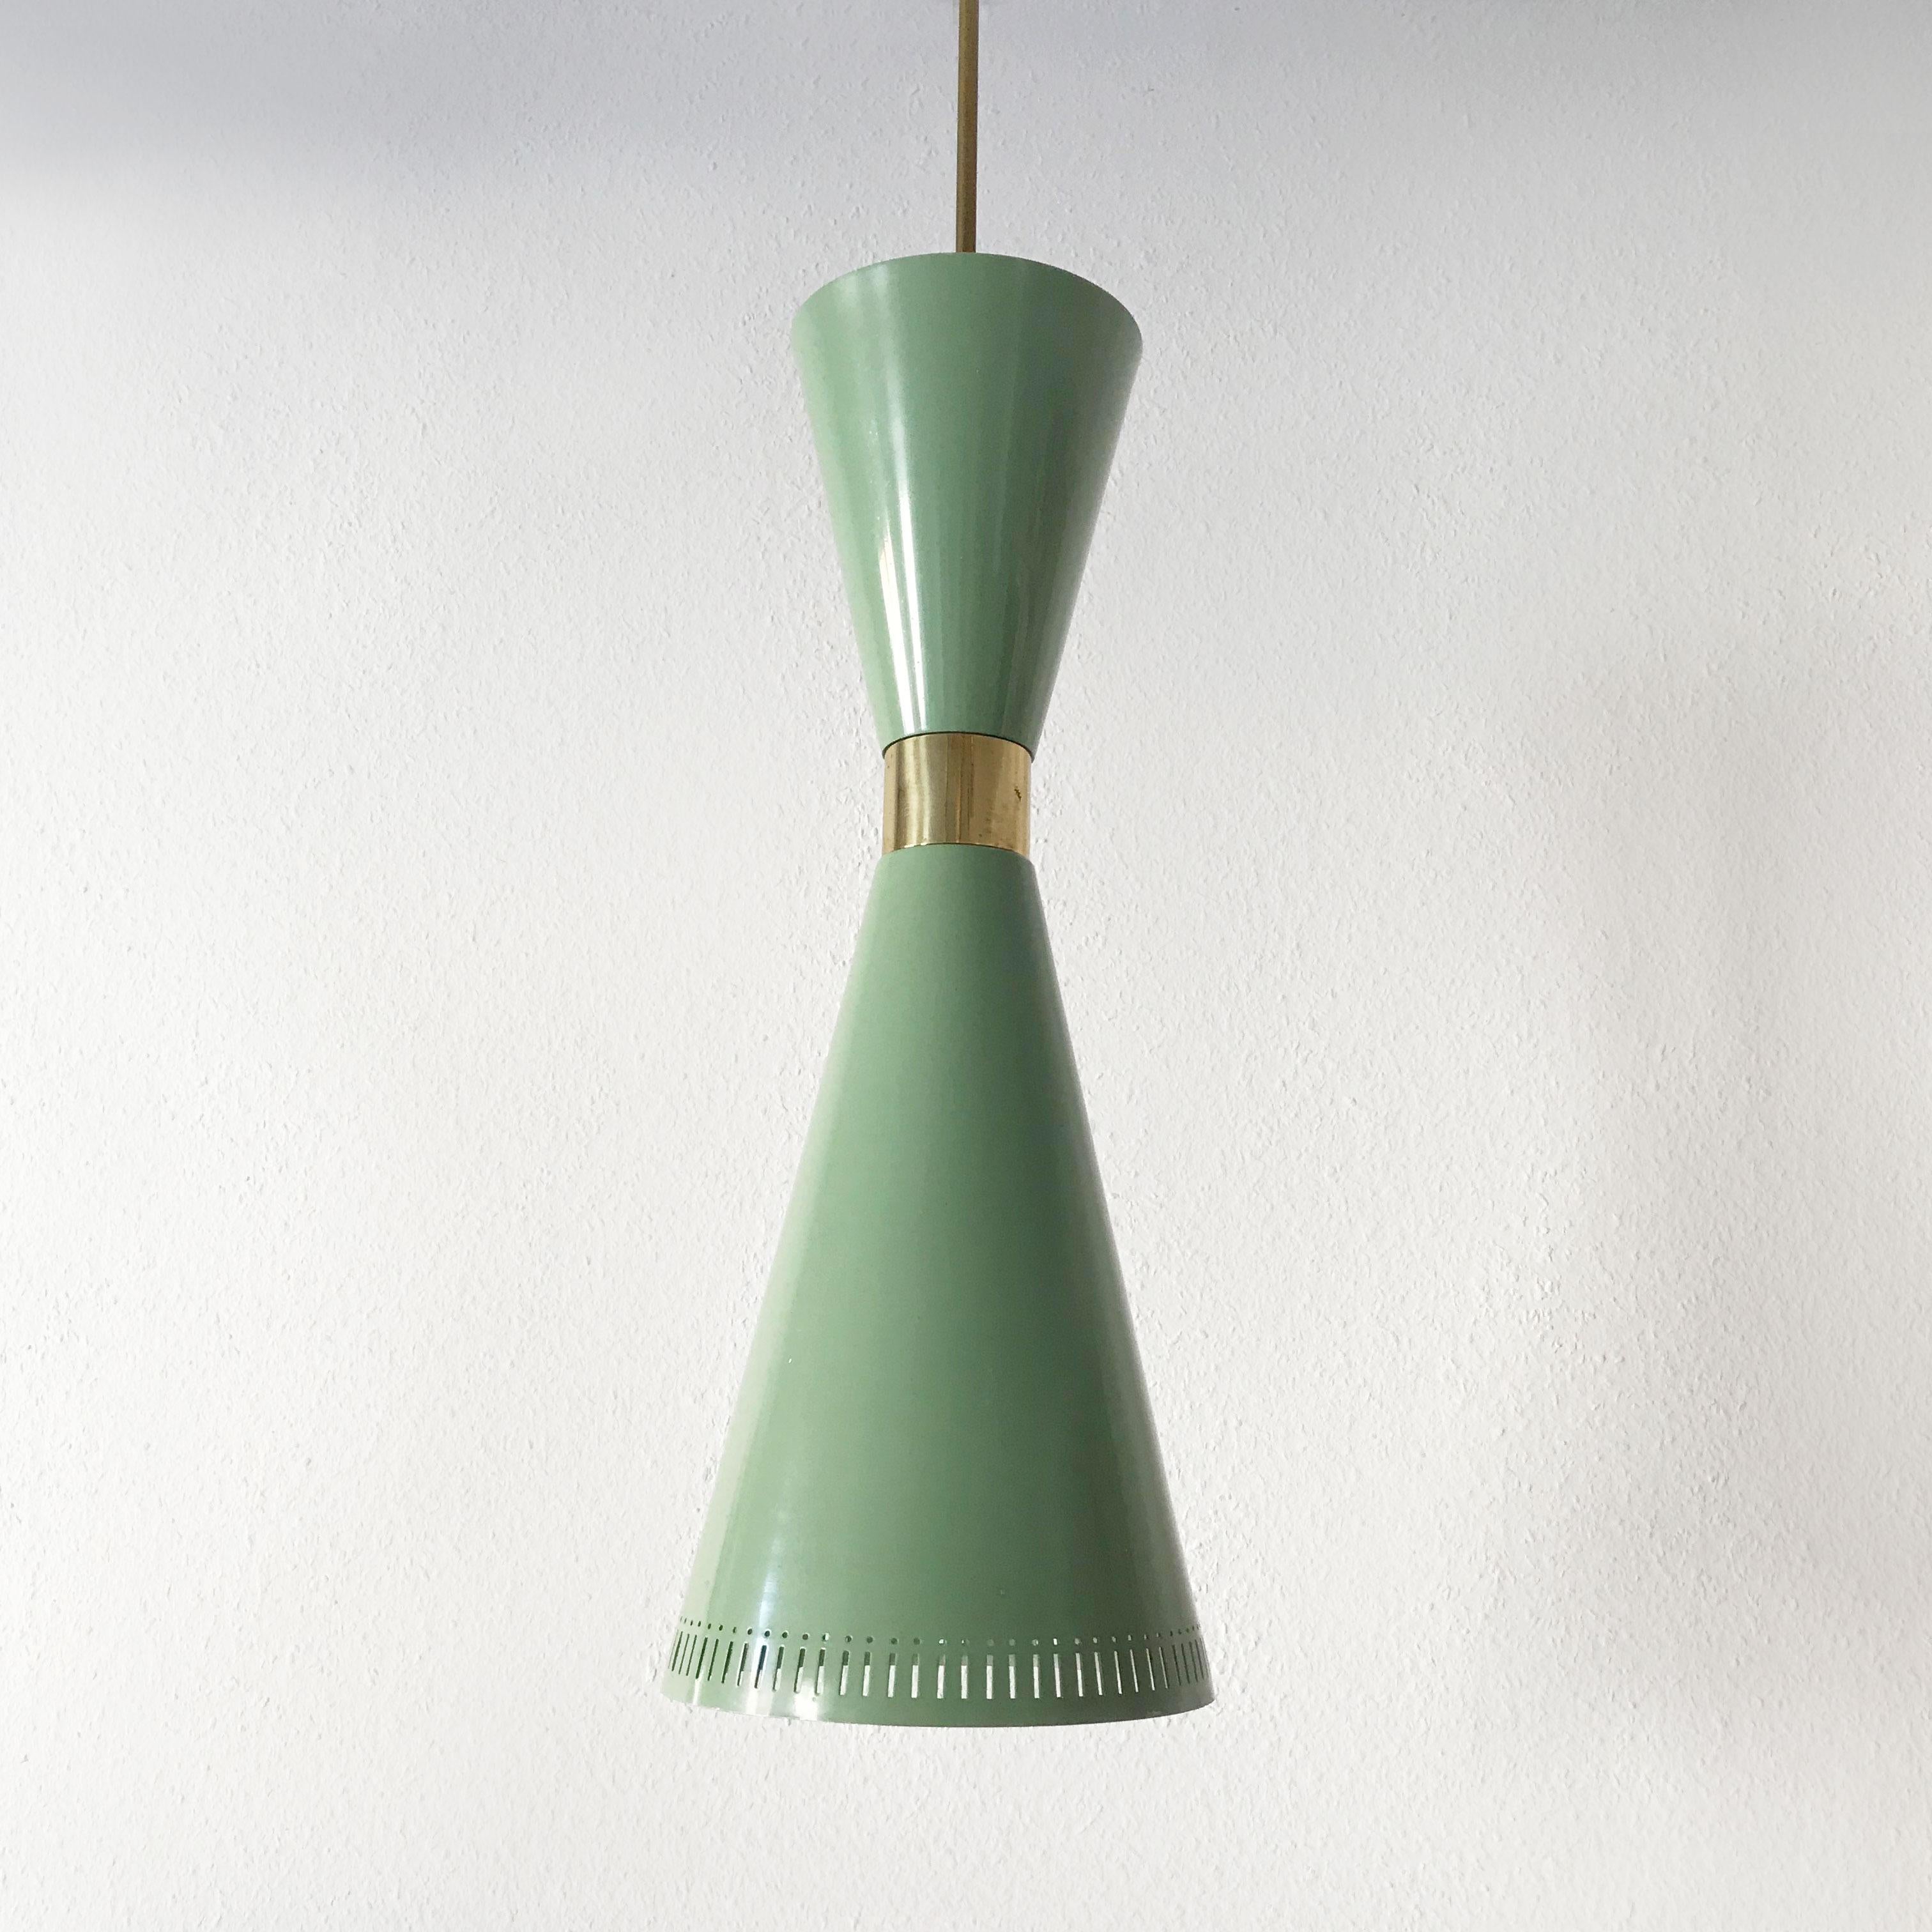 Exceptional Mid-Century Modern Large Diabolo Pendant Lamp by BAG Turgi, 1950s 2